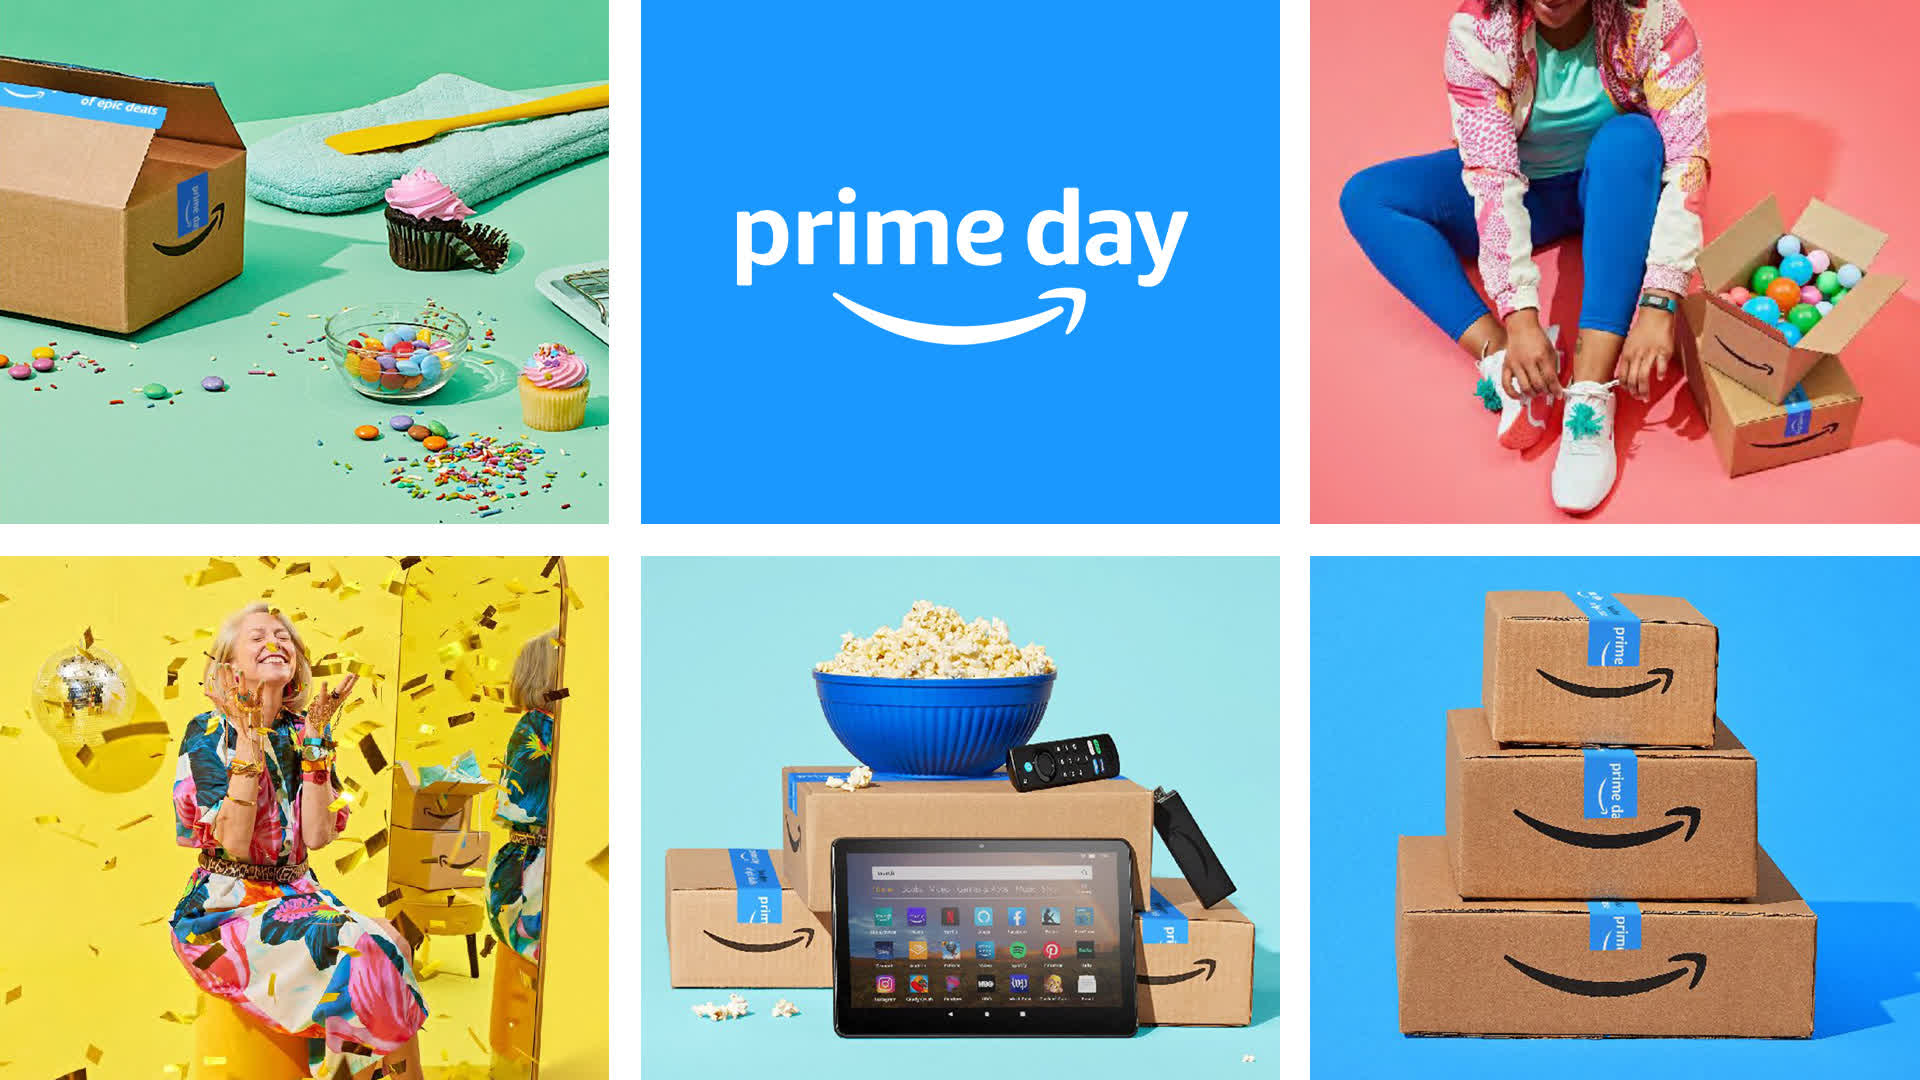 Amazon will hold another Prime sales event this fall